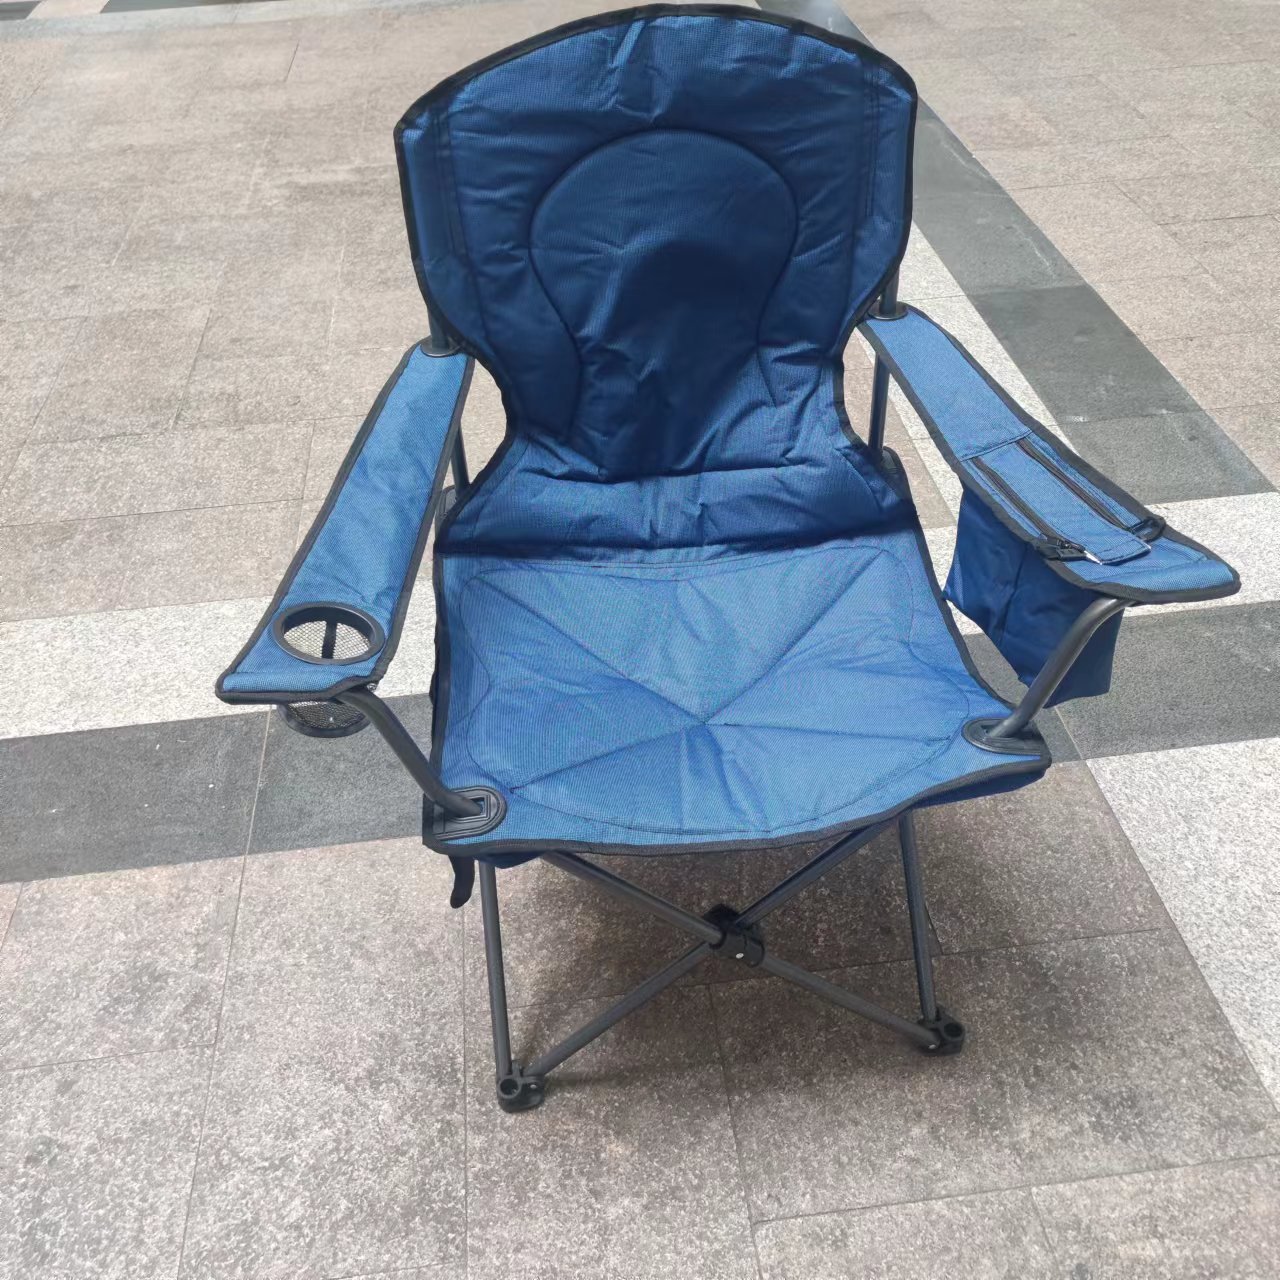 Paded Camping Foldable Chair With Cooler & Storage Bag Mande in China